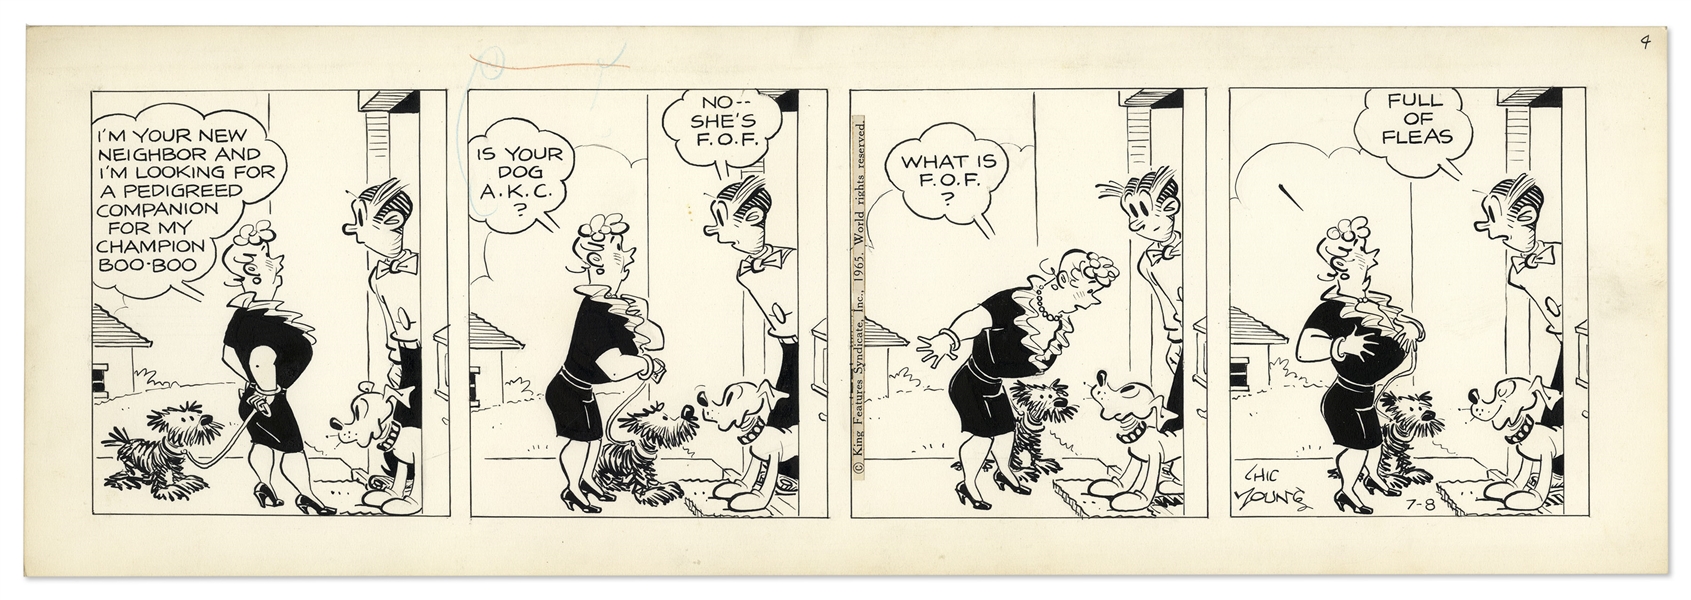 2 Chic Young Hand-Drawn ''Blondie'' Comic Strips From 1965 -- With Chic Young's Original Preliminary Artwork for One